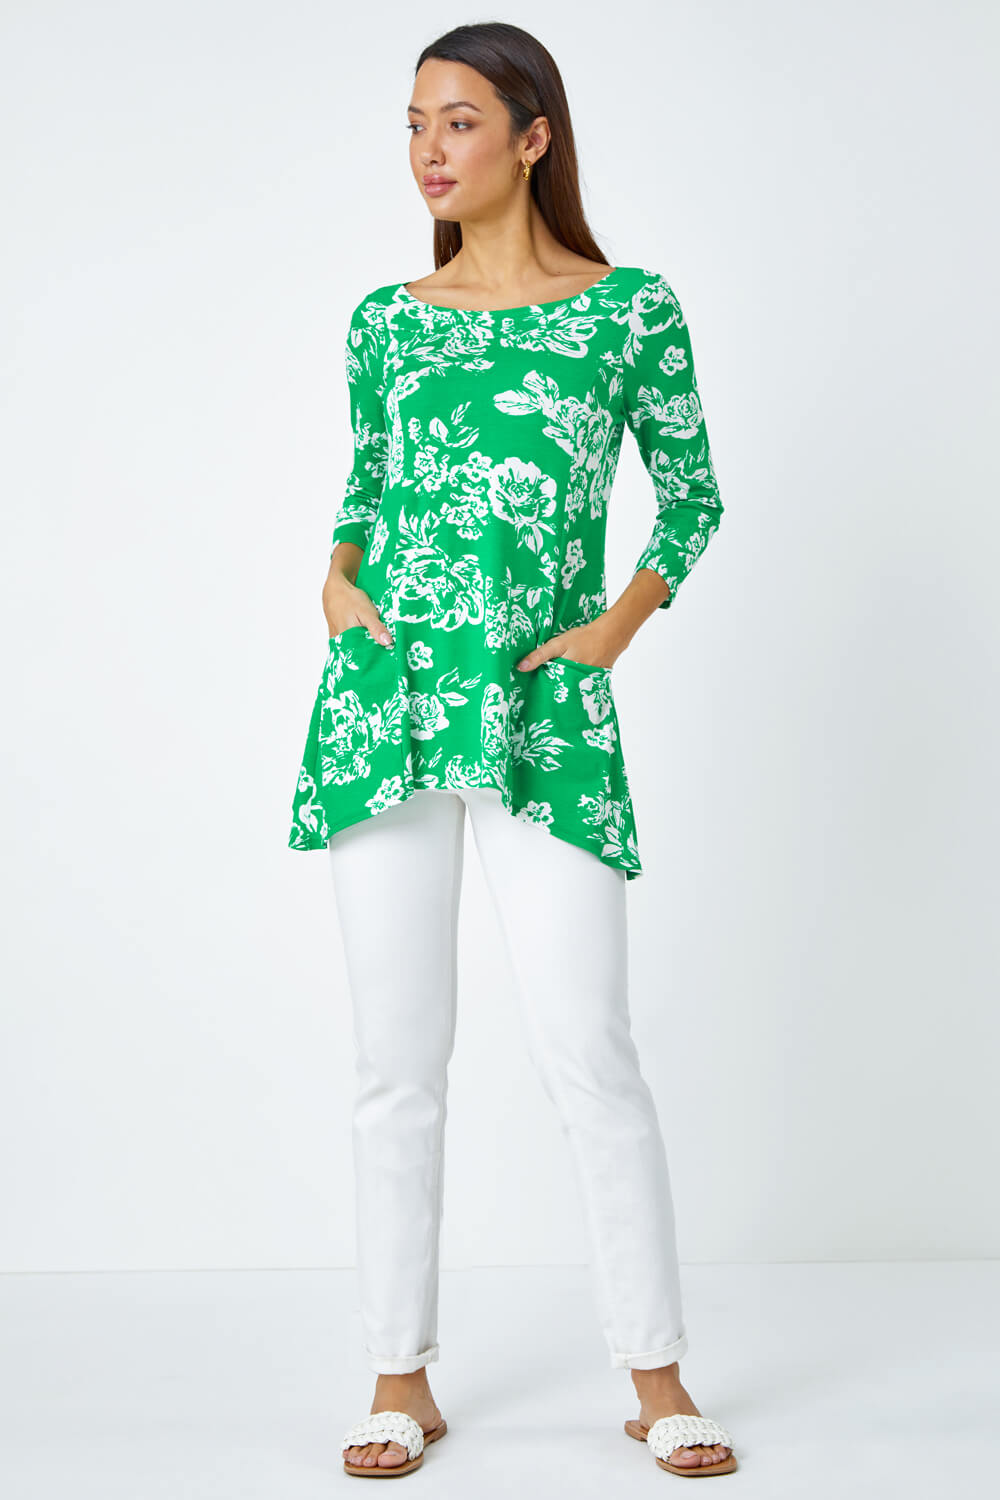 Green Floral Print Swing Stretch Top, Image 2 of 5